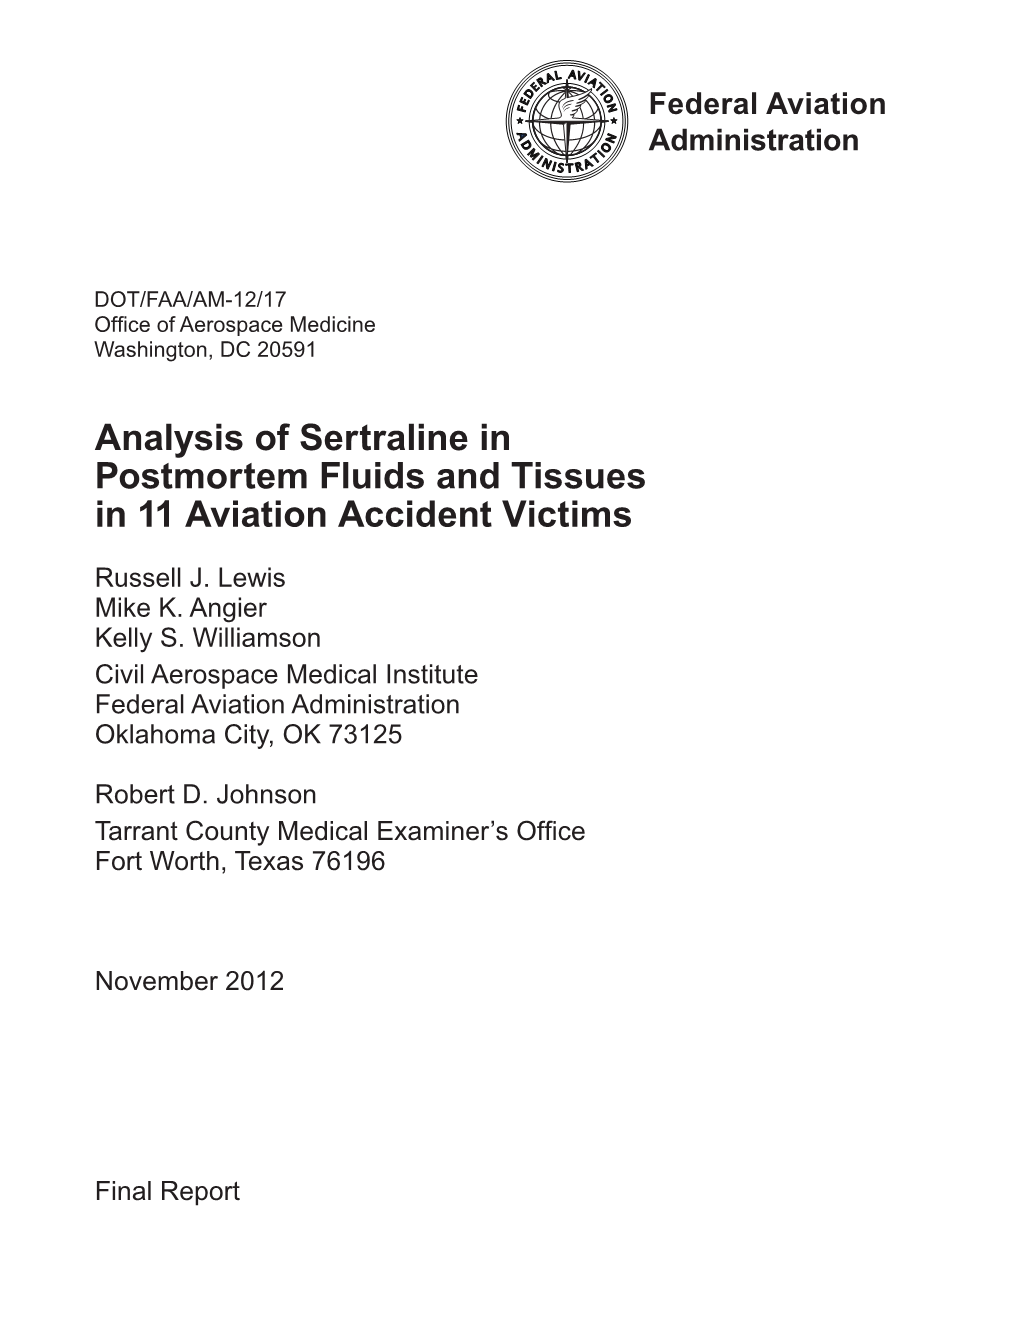 Analysis of Sertraline in Postmortem Fluids and Tissues in 11 Aviation Accident Victims